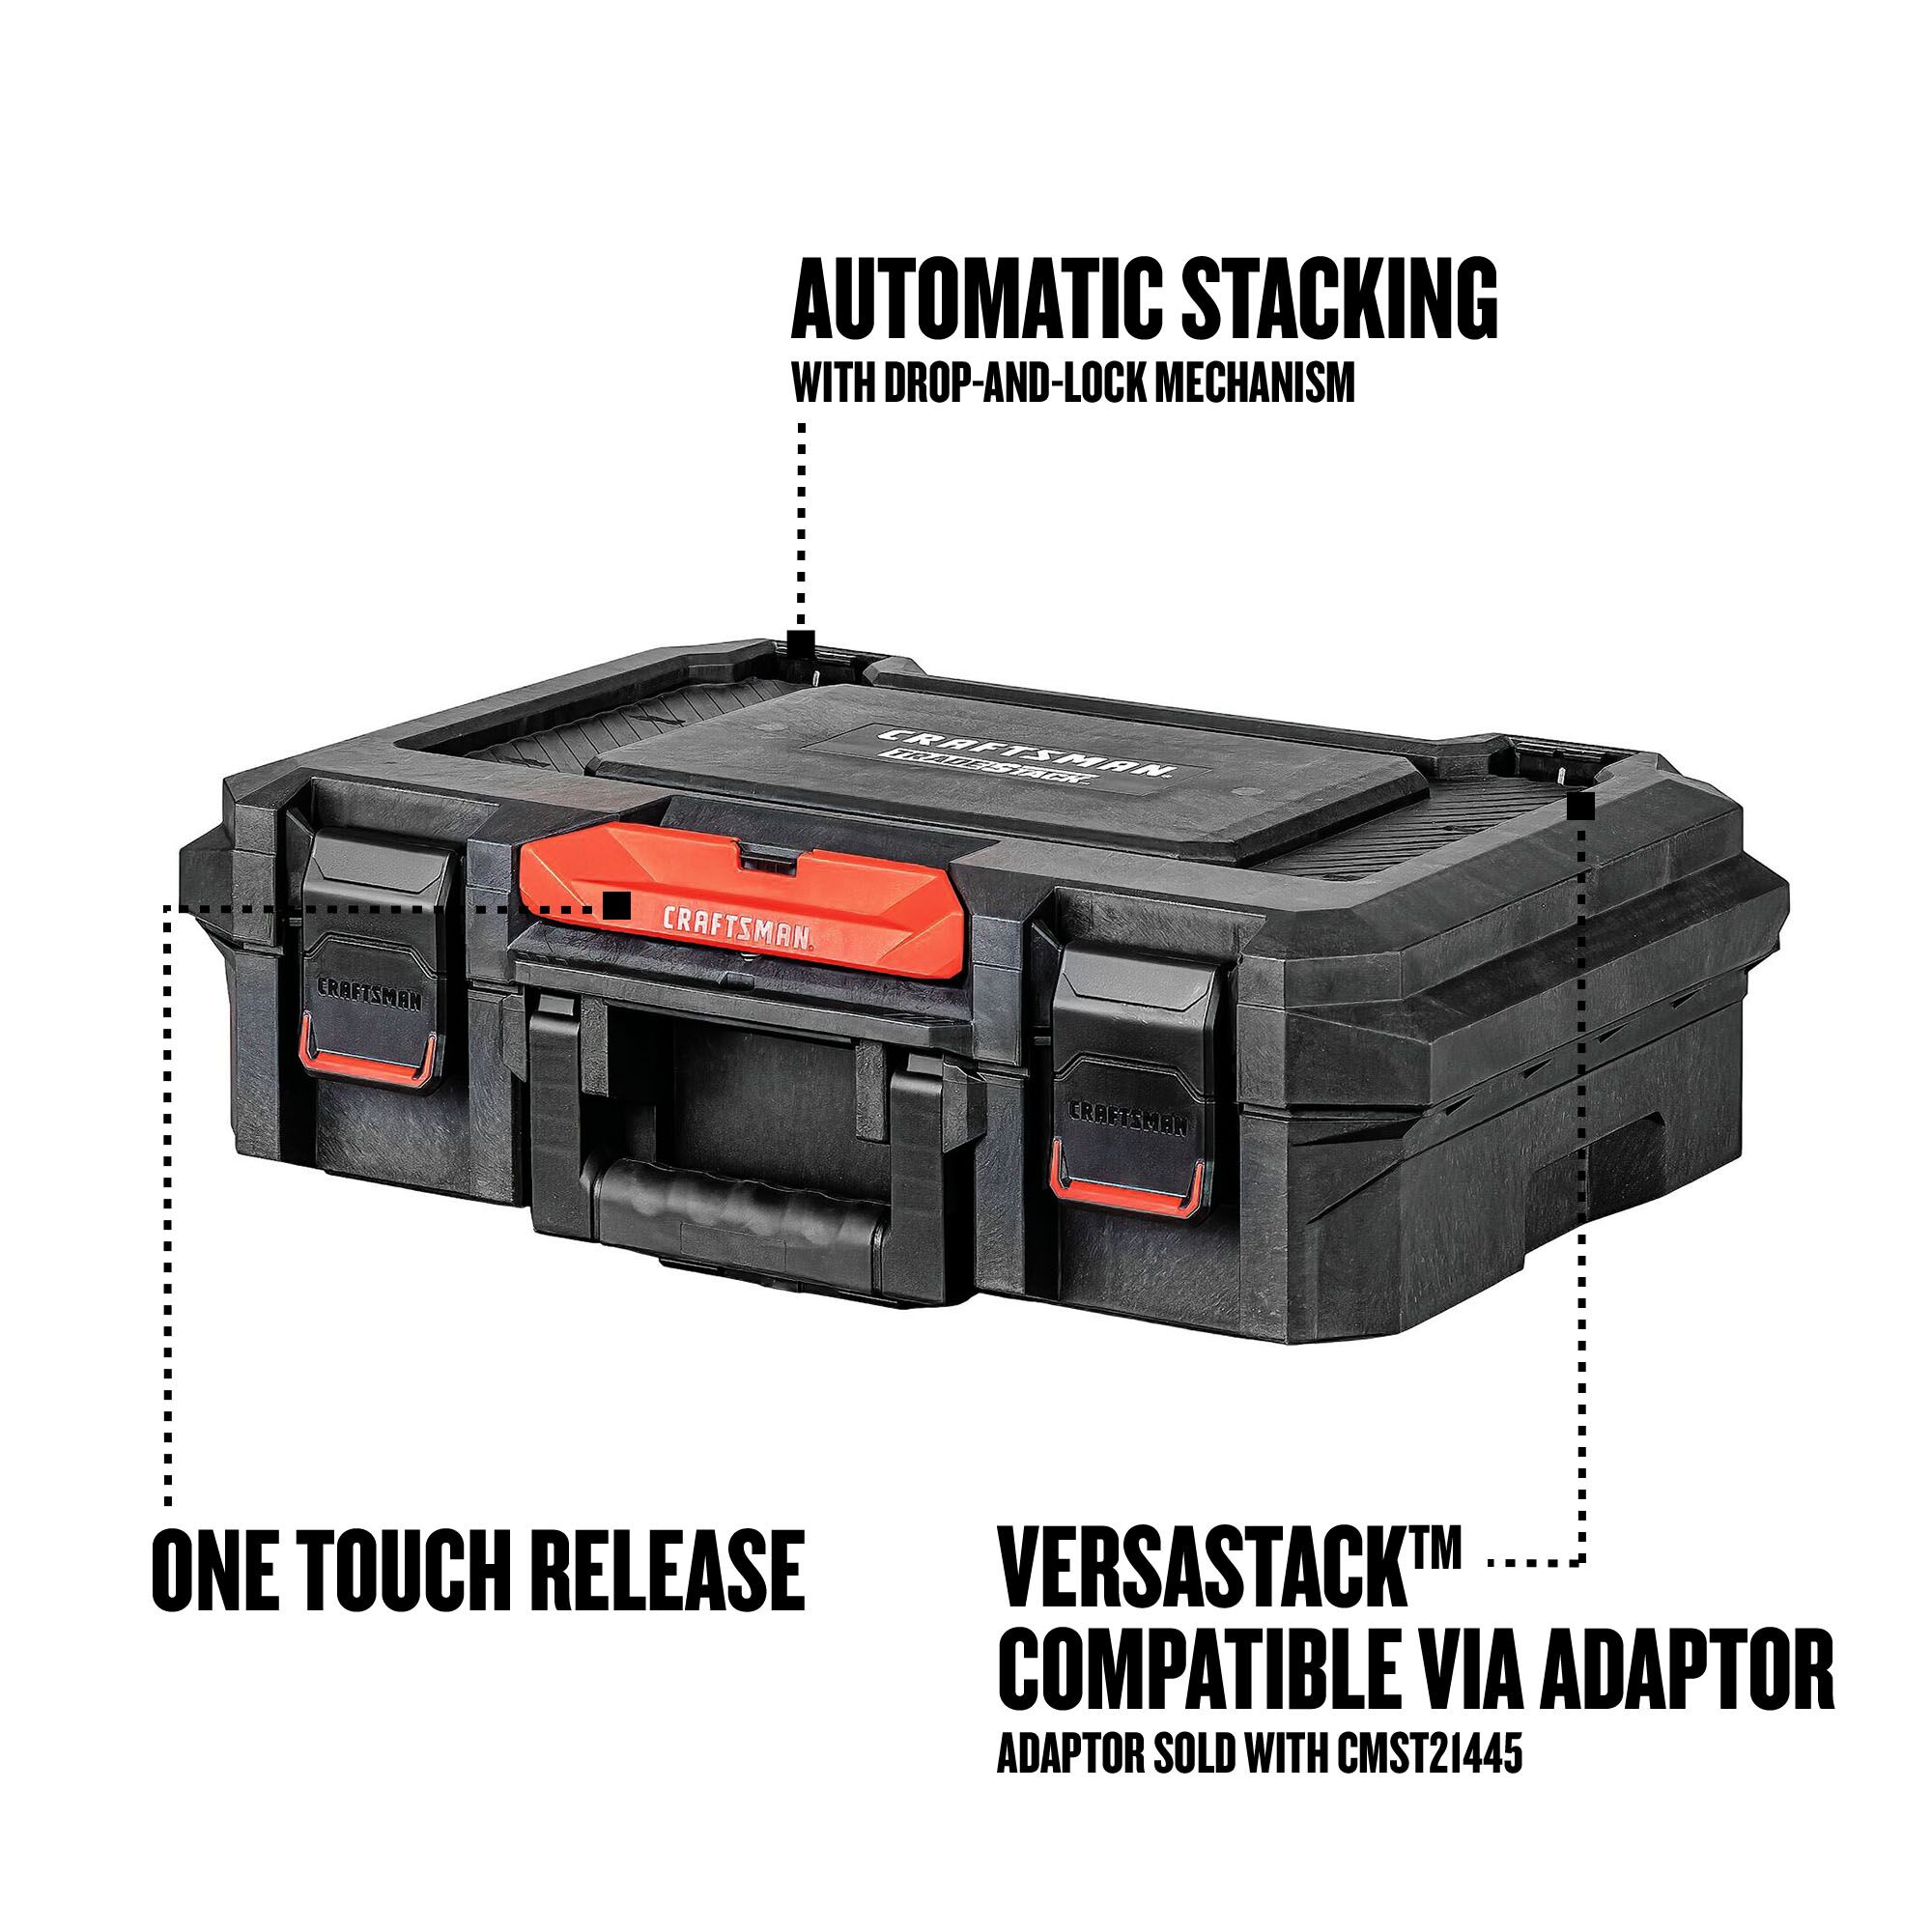 Automatic stacking with drop-and-lock mechanism, one touch release, VERSASTACK compatible via adaptor. Adaptor sold with CMST21445